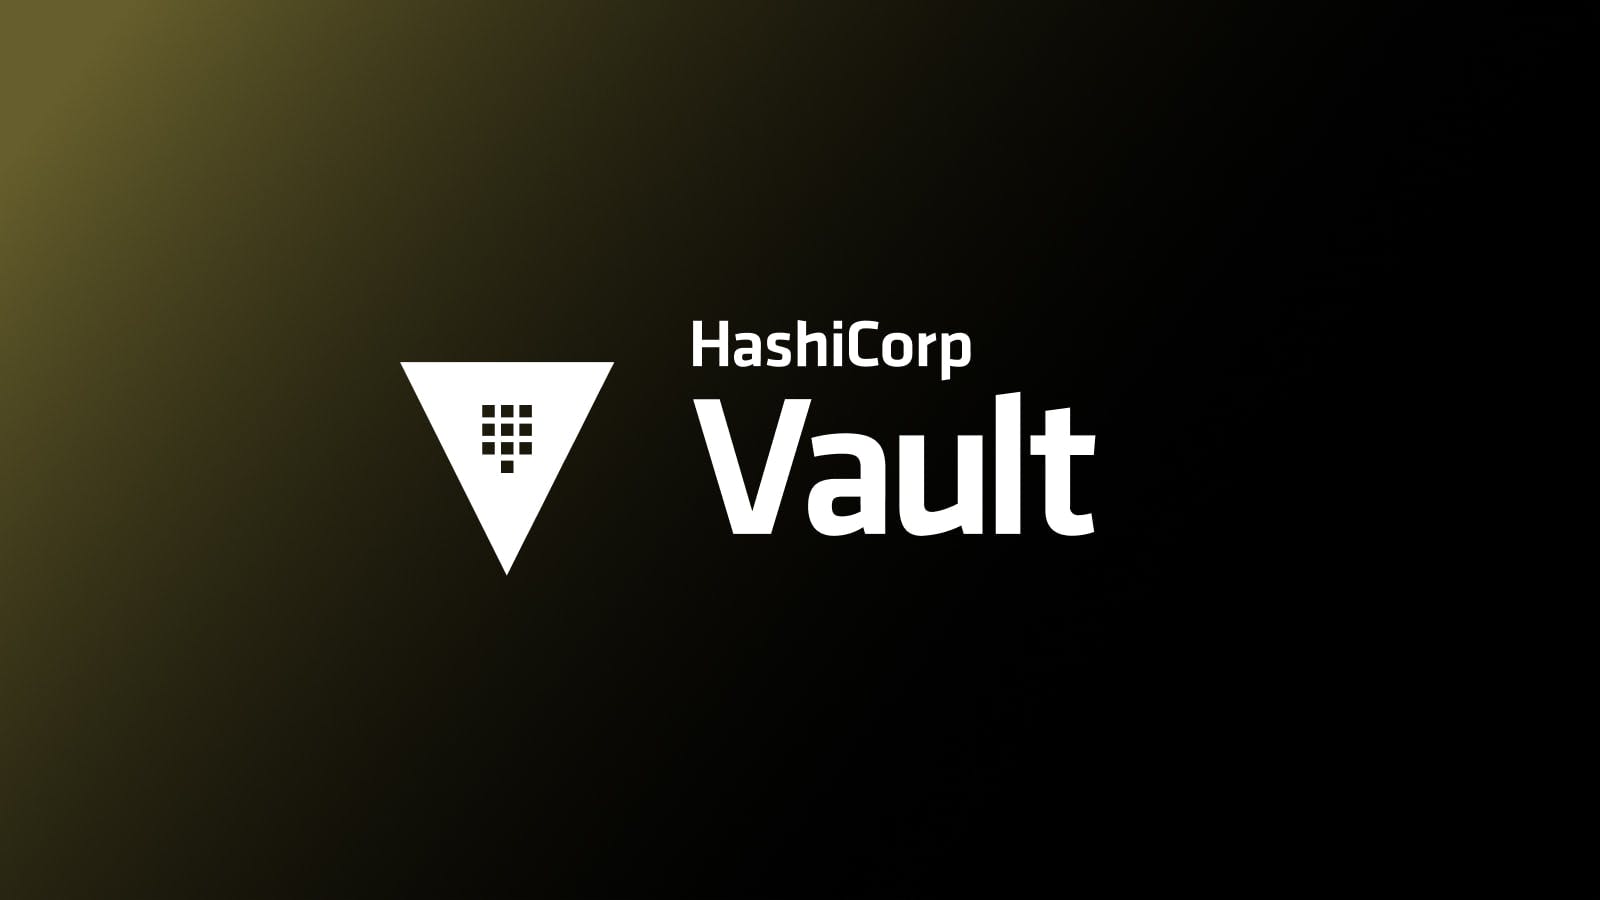 Managing SSH Access at Scale with HashiCorp Vault